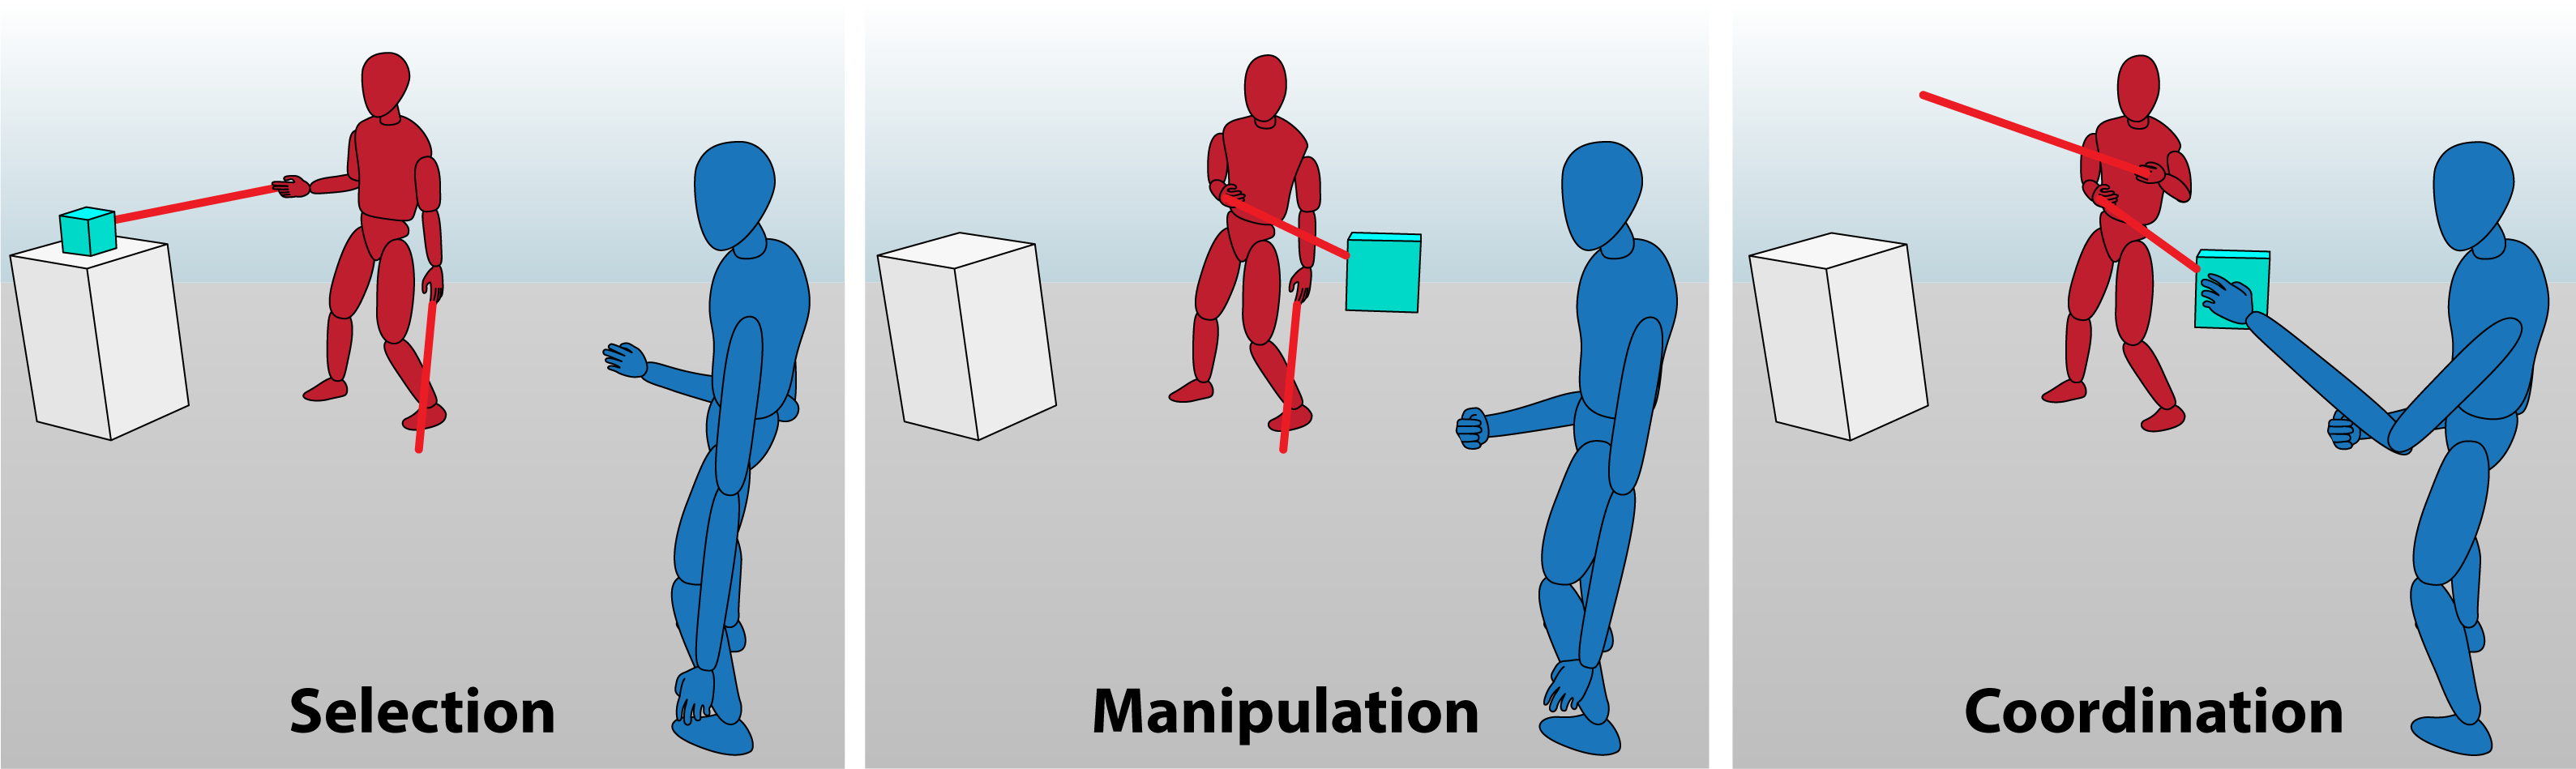 Three part diagram showing two figures handing an object between them. The first is labeled Selection and shows a red figure pointing at an object. The second is labeled Manipulation and shows the red figure holding the object in front of a blue figure. The third is labeled Coordination and shows the blue figure grabbing the object.